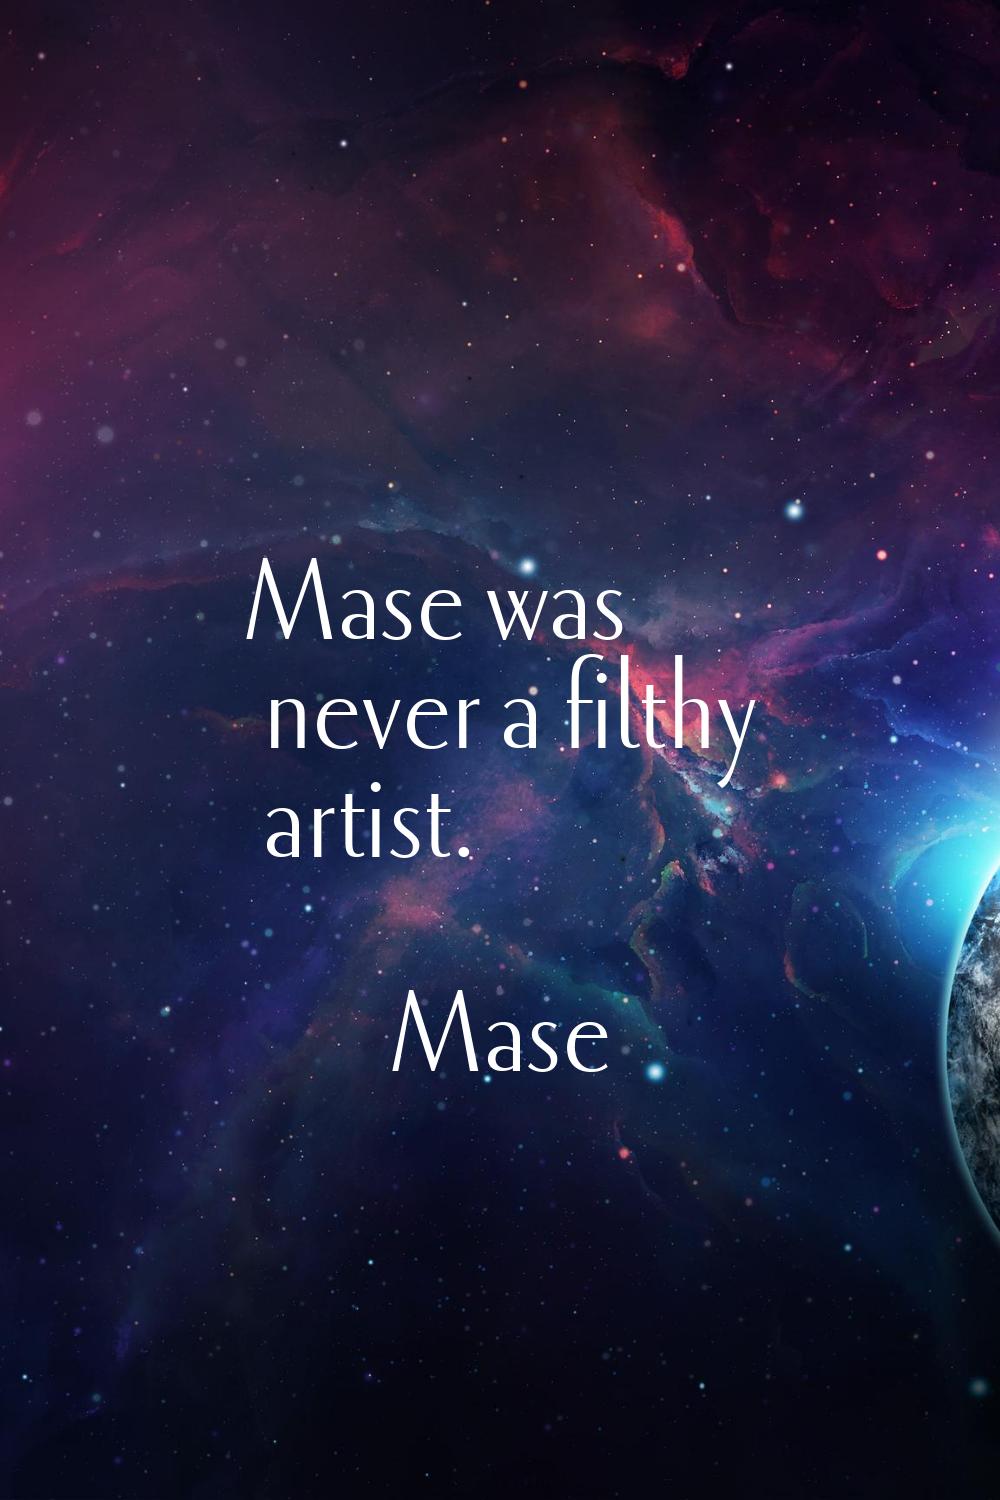 Mase was never a filthy artist.